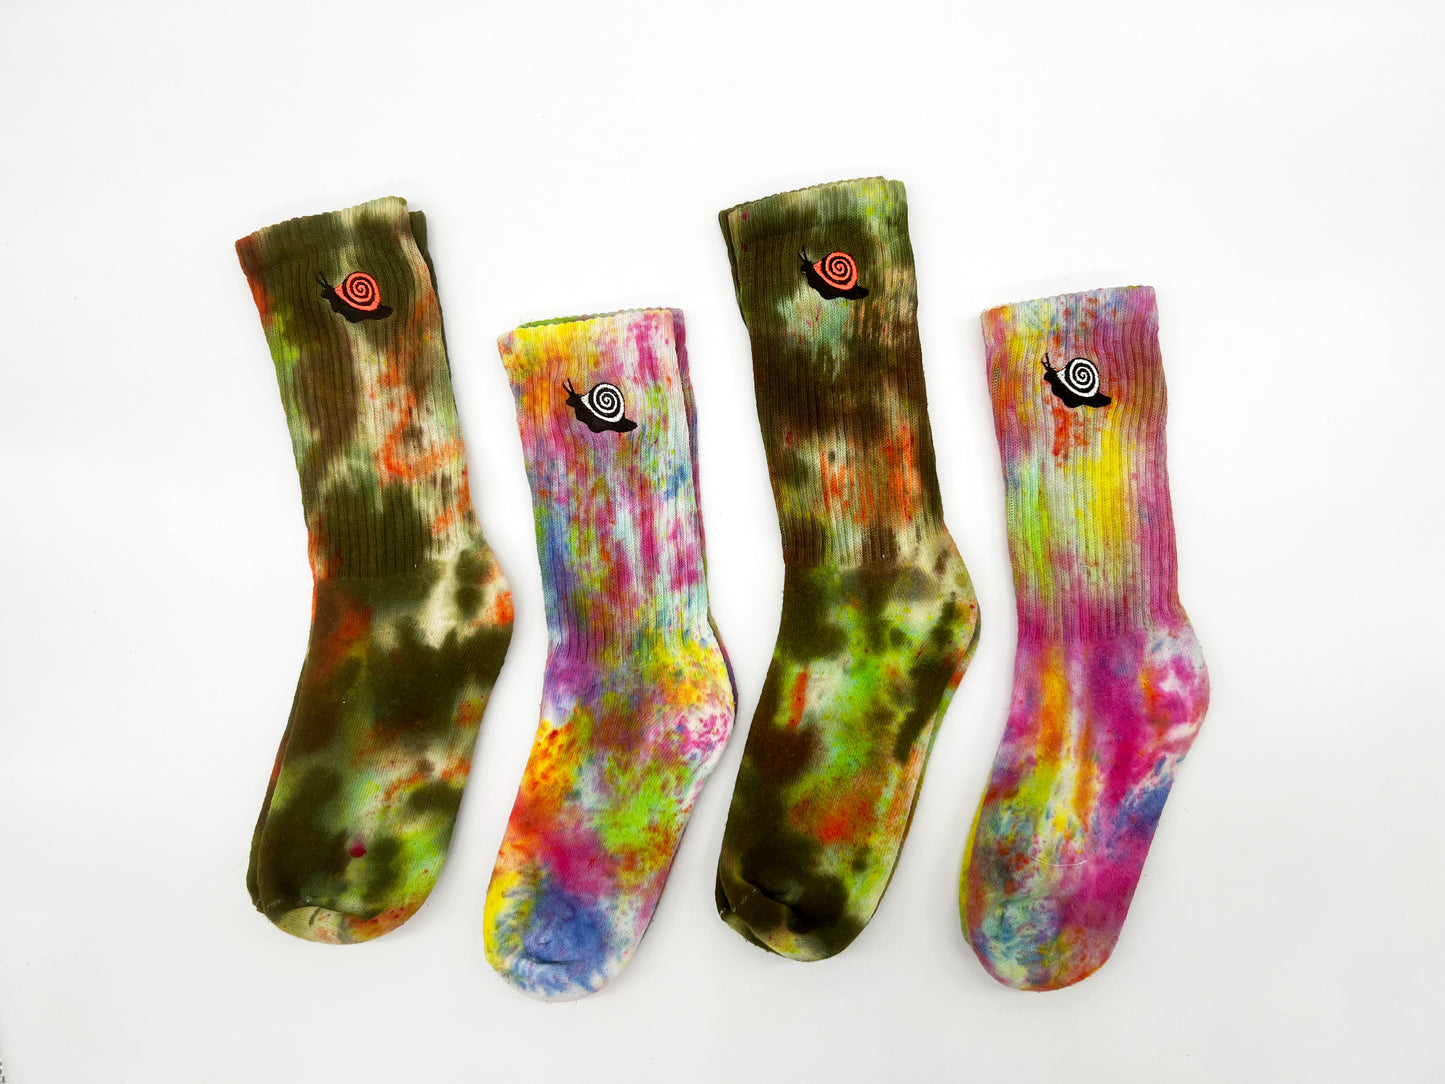 Two different styles of hand dyed and embroidered socks, one in greens and oranges called 'Alligator Camo' and one in all colors of the rainbow called 'Party Rainbow'